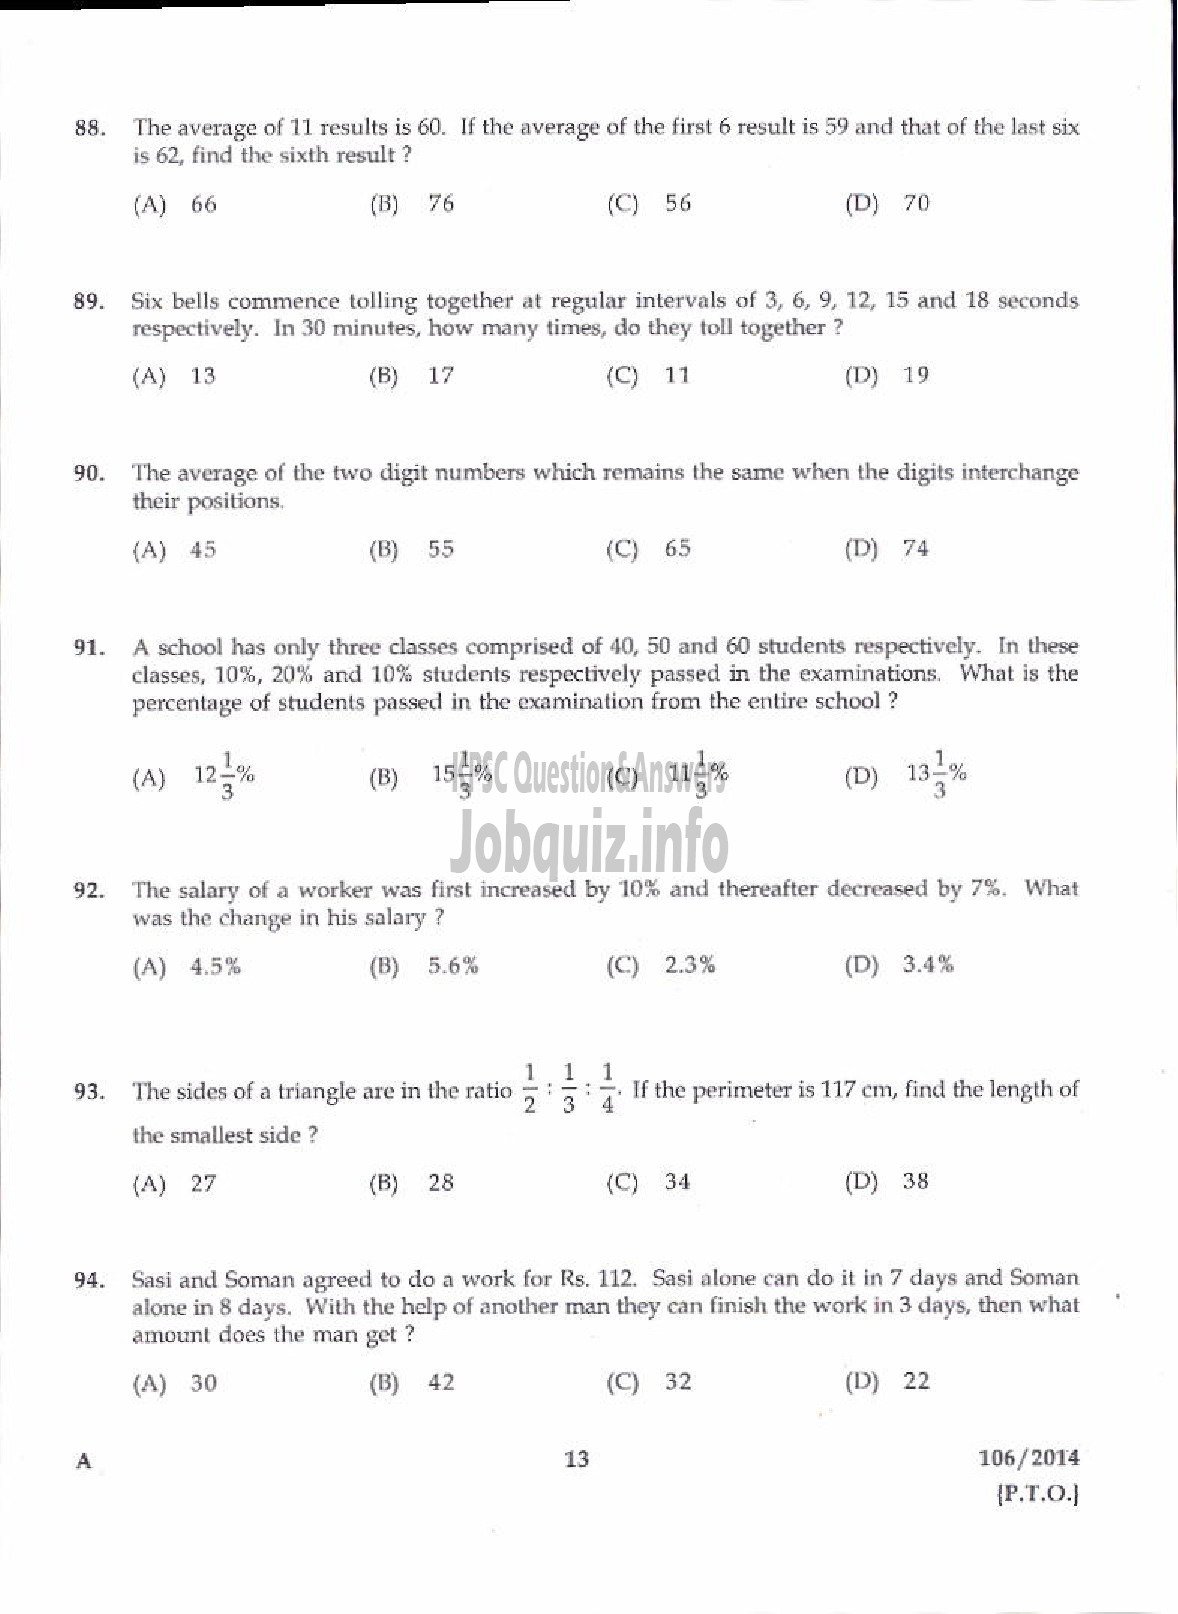 Kerala PSC Question Paper - DIVISIONAL ACCOUNTANT KERALA WATER AUTHORITY PRELIMINARY TEST-11